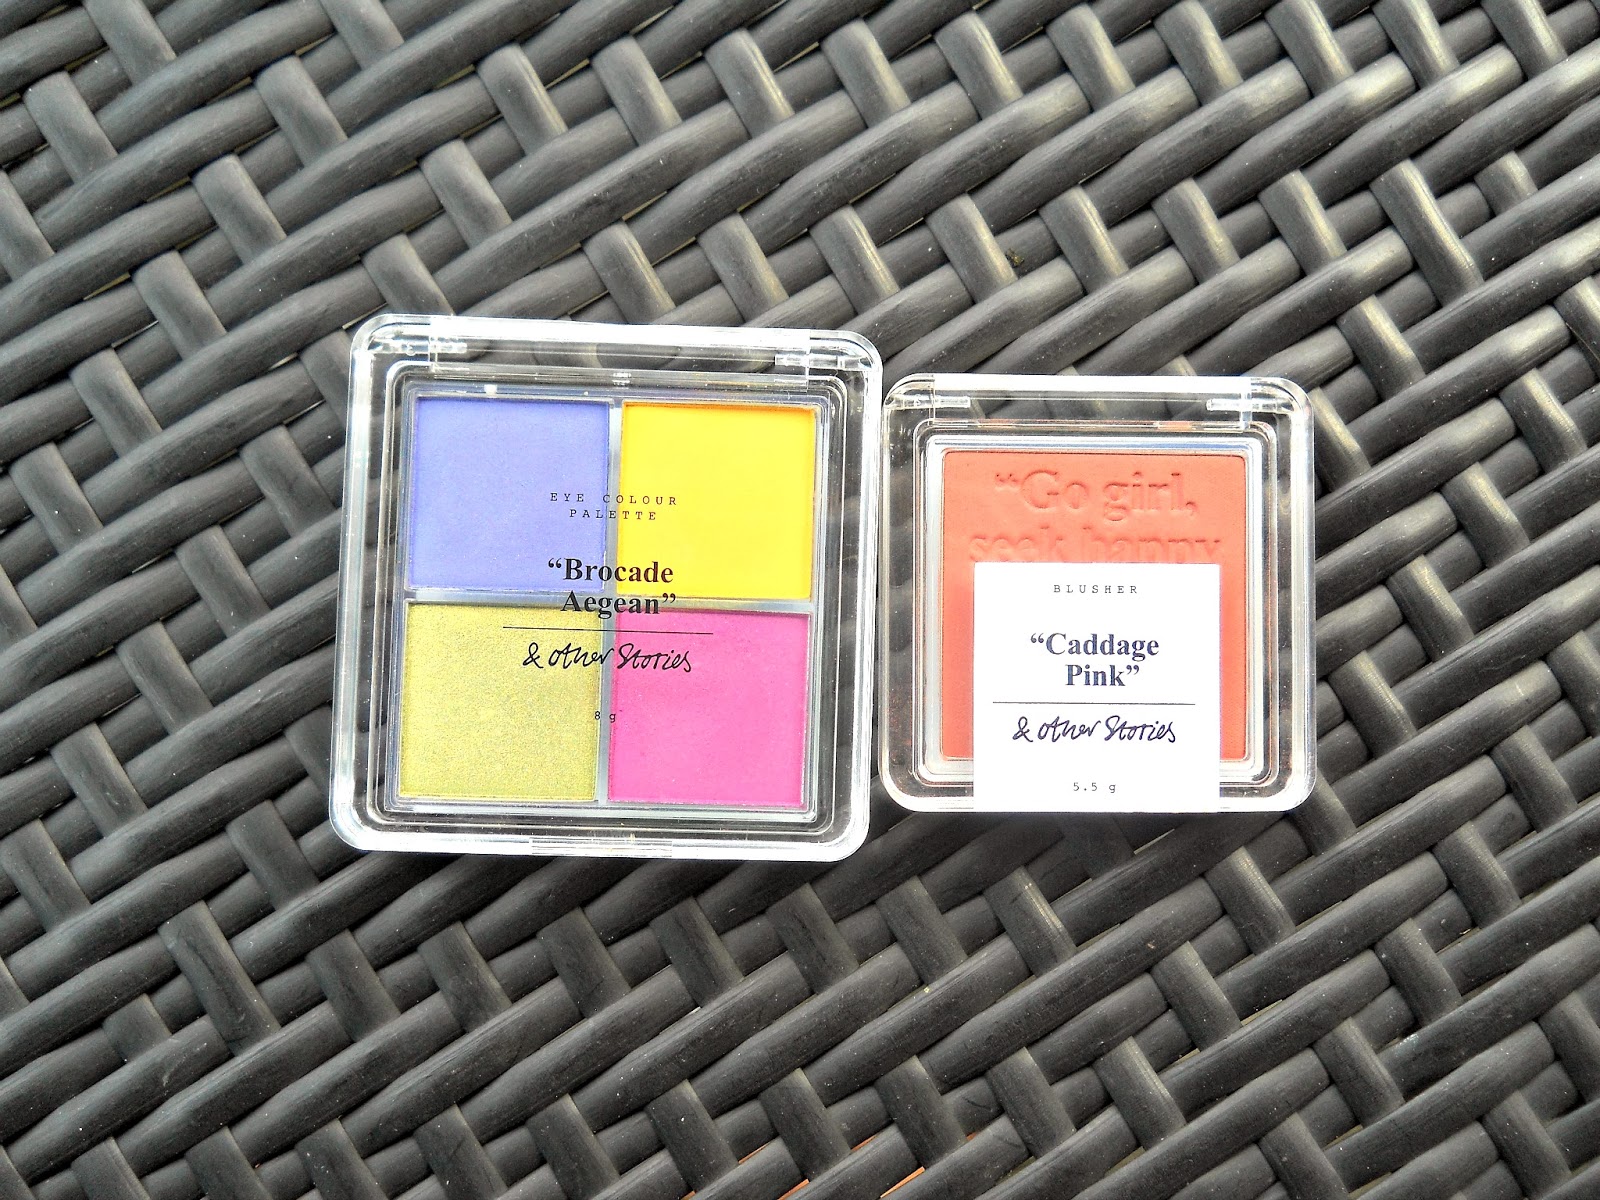 FashStyleLiv: &Other Stories Haul- Brocade Aegean Eyeshadow and